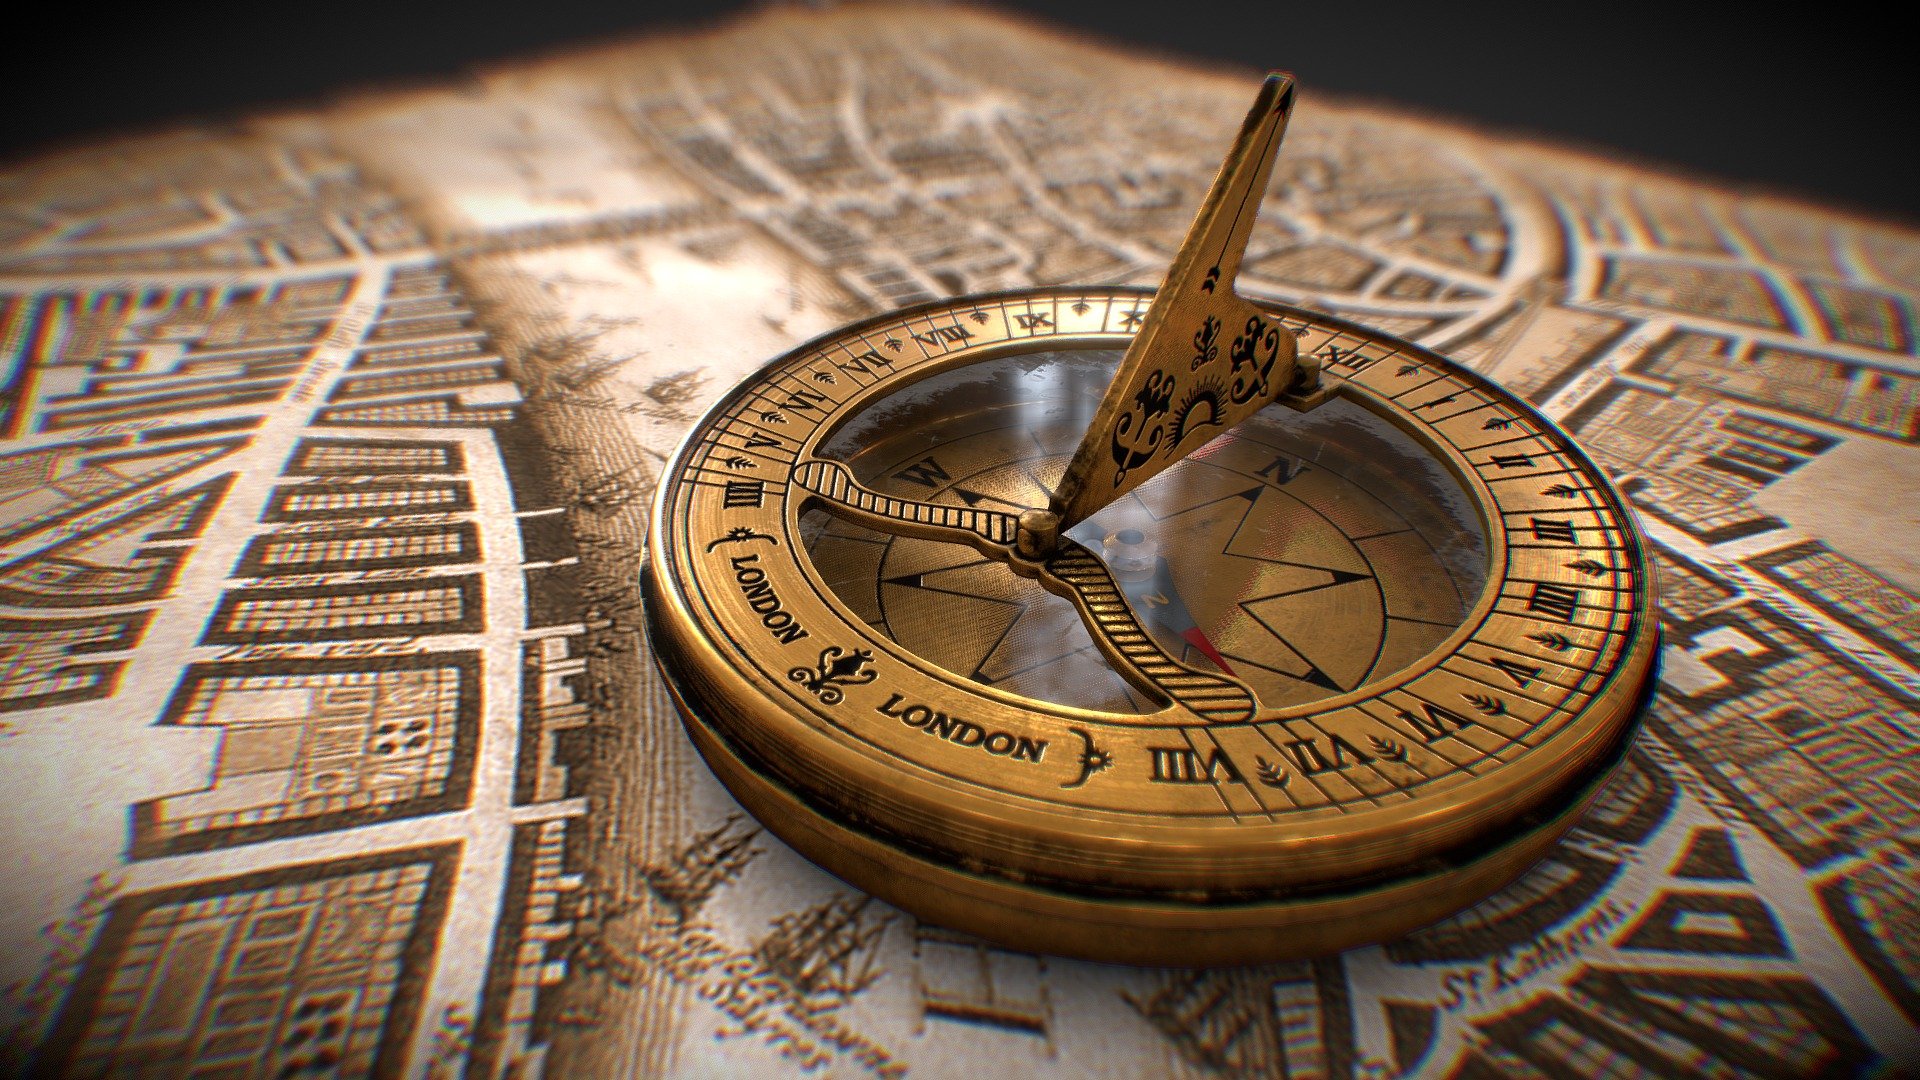 Antique British Sundial is a device that tells the time of day when there is sunlight by the apparent position of the Sun in the sky. This model is prepared with PBR work flow. It can be also used as a magnetic compass as well. This is a game ready model 3d model